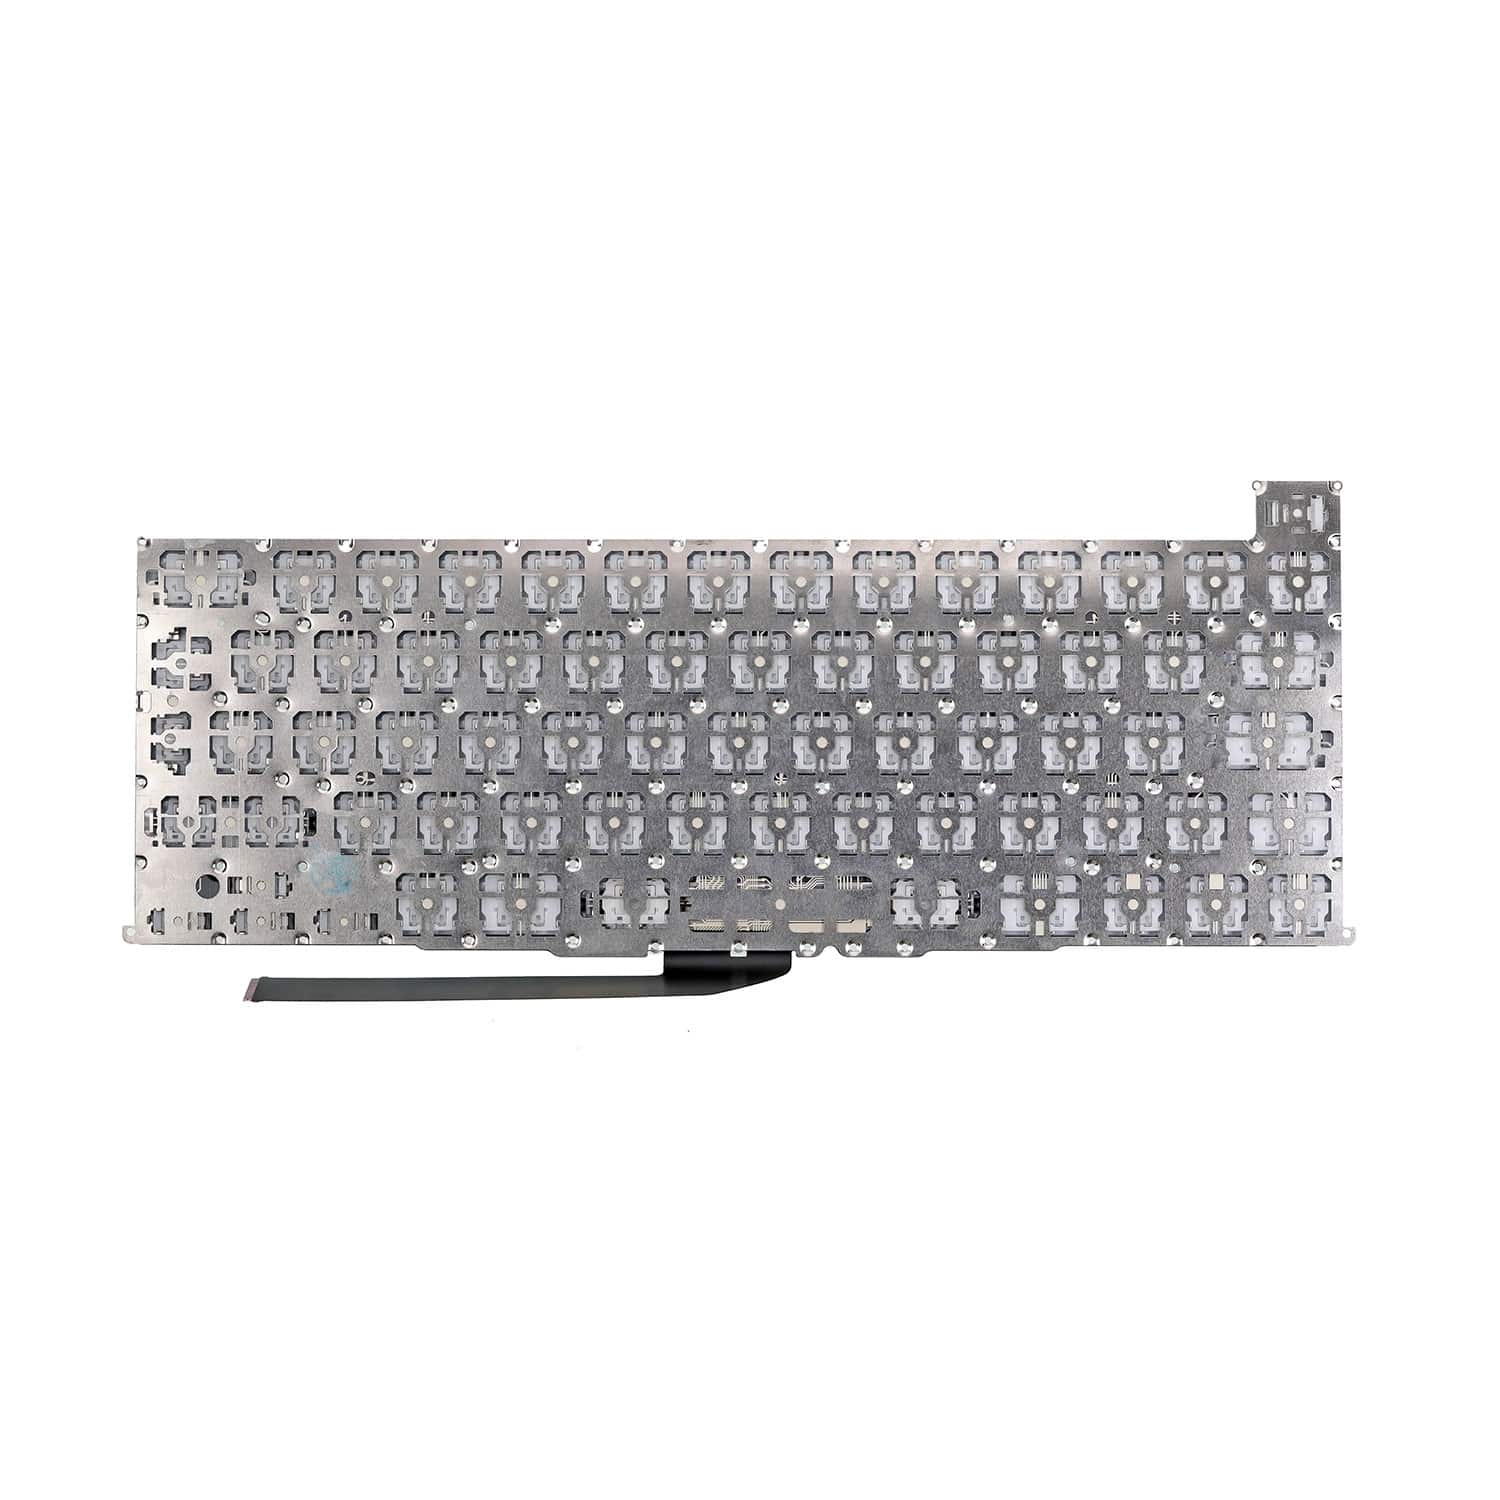 KEYBOARD (UK ENGLISH) FOR MACBOOK PRO TOUCH 16" A2141 LATE 2019 - MID 2020